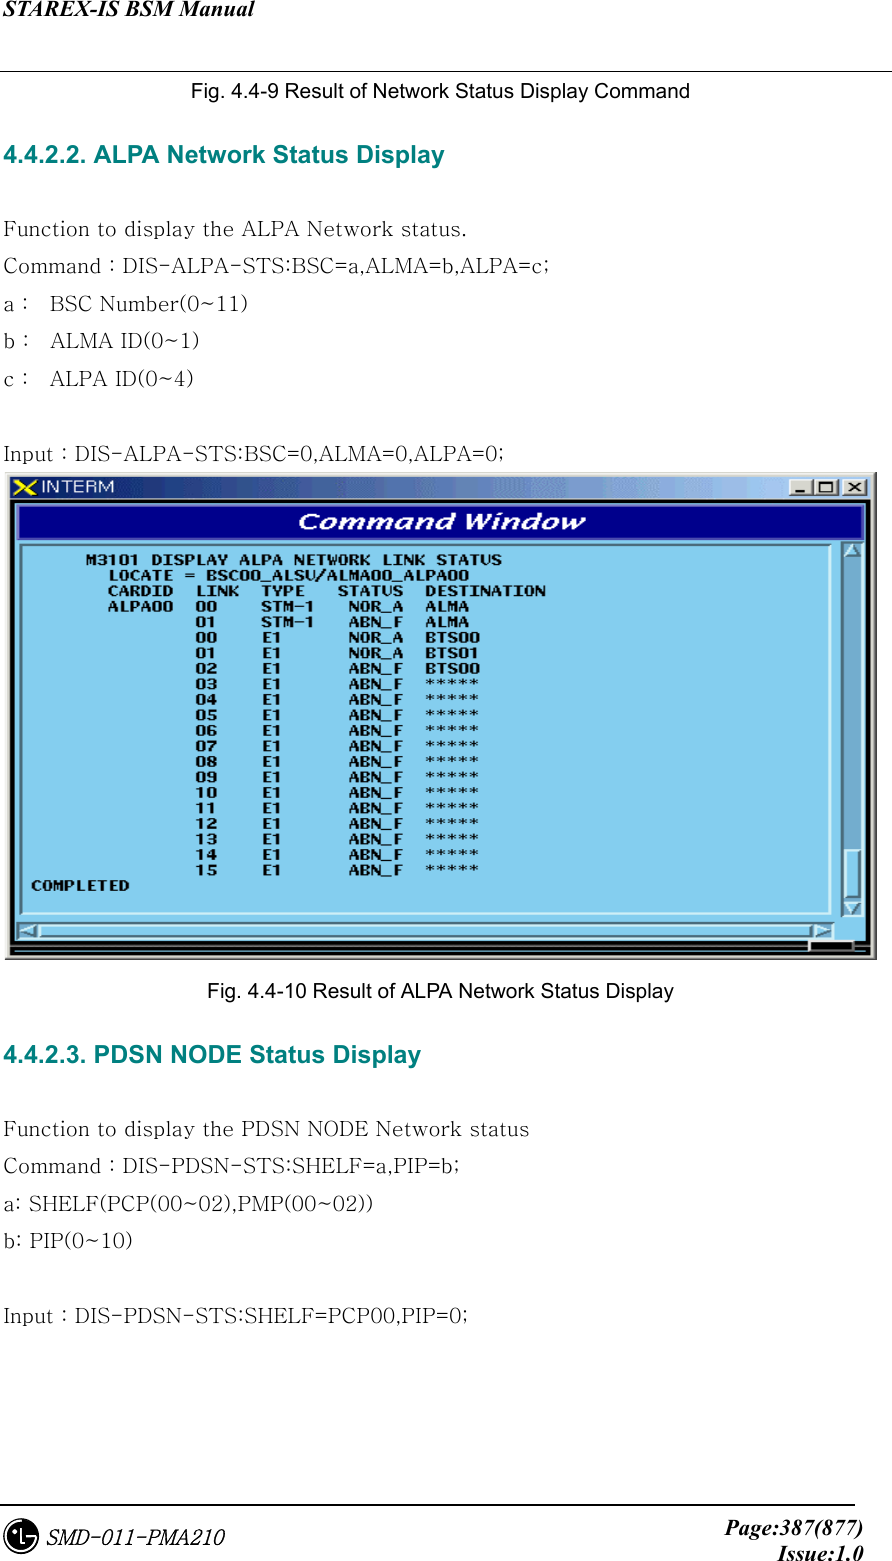 STAREX-IS BSM Manual     Page:387(877)Issue:1.0SMD-011-PMA210 Fig. 4.4-9 Result of Network Status Display Command 4.4.2.2. ALPA Network Status Display  Function to display the ALPA Network status. Command : DIS-ALPA-STS:BSC=a,ALMA=b,ALPA=c; a :  BSC Number(0~11) b :    ALMA ID(0~1) c :    ALPA ID(0~4)  Input : DIS-ALPA-STS:BSC=0,ALMA=0,ALPA=0;  Fig. 4.4-10 Result of ALPA Network Status Display 4.4.2.3. PDSN NODE Status Display  Function to display the PDSN NODE Network status Command : DIS-PDSN-STS:SHELF=a,PIP=b; a: SHELF(PCP(00~02),PMP(00~02)) b: PIP(0~10)  Input : DIS-PDSN-STS:SHELF=PCP00,PIP=0; 